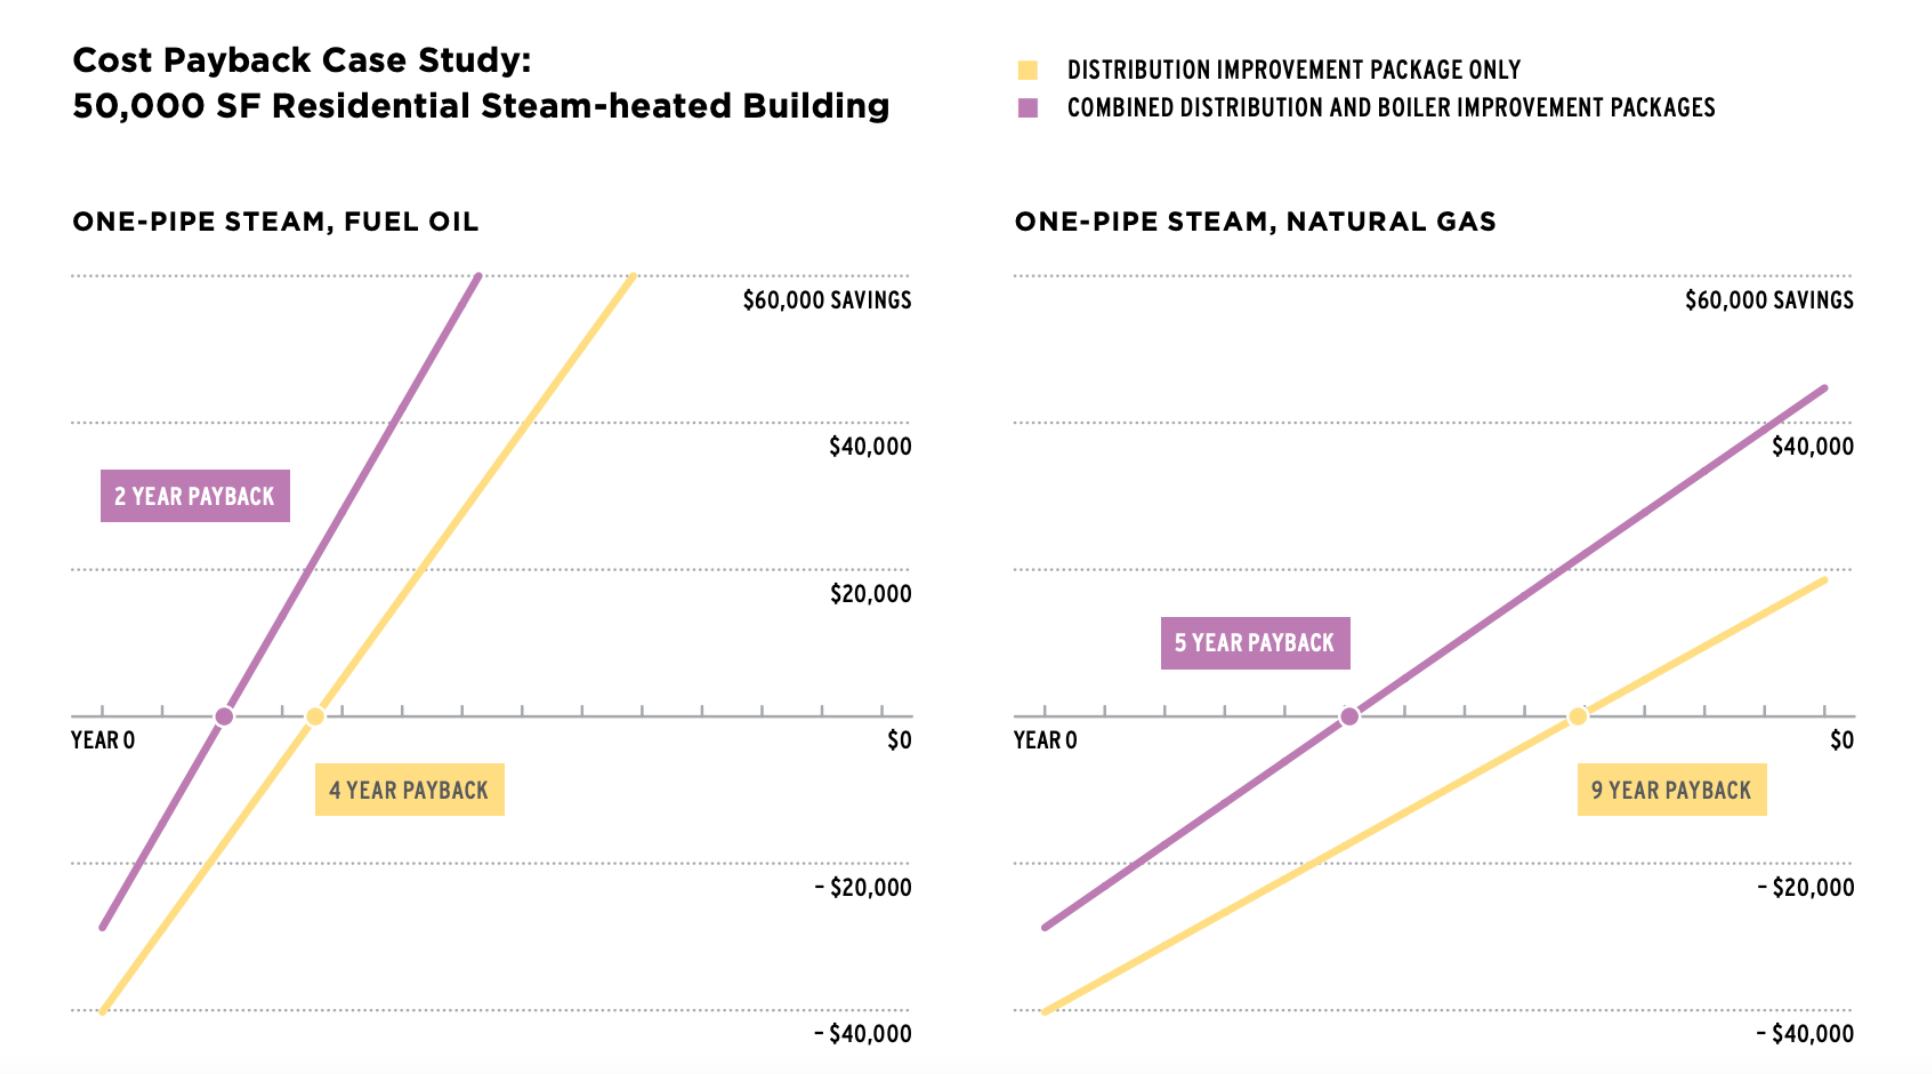 Savings from one-pipe steam in fuel oil and natural gas.